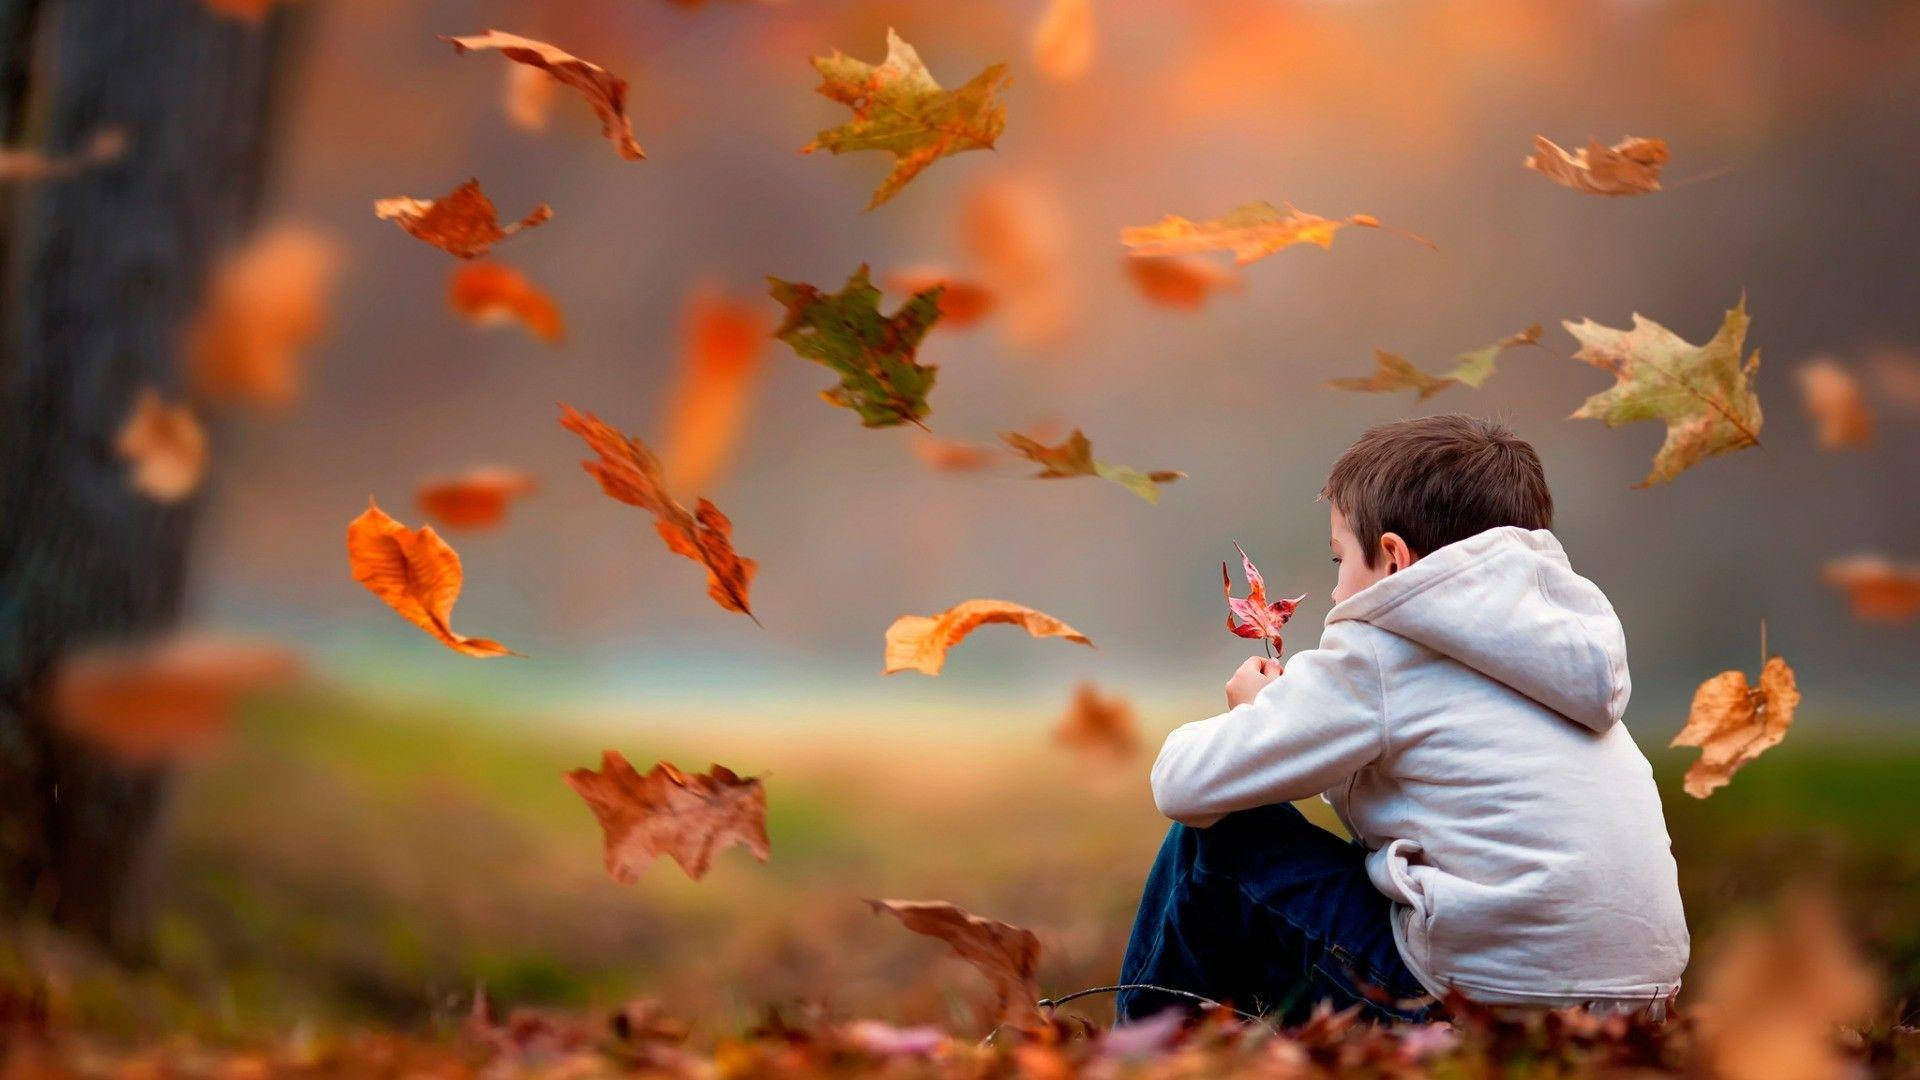 "A child finds joy in the windy Autumn season". Wallpaper